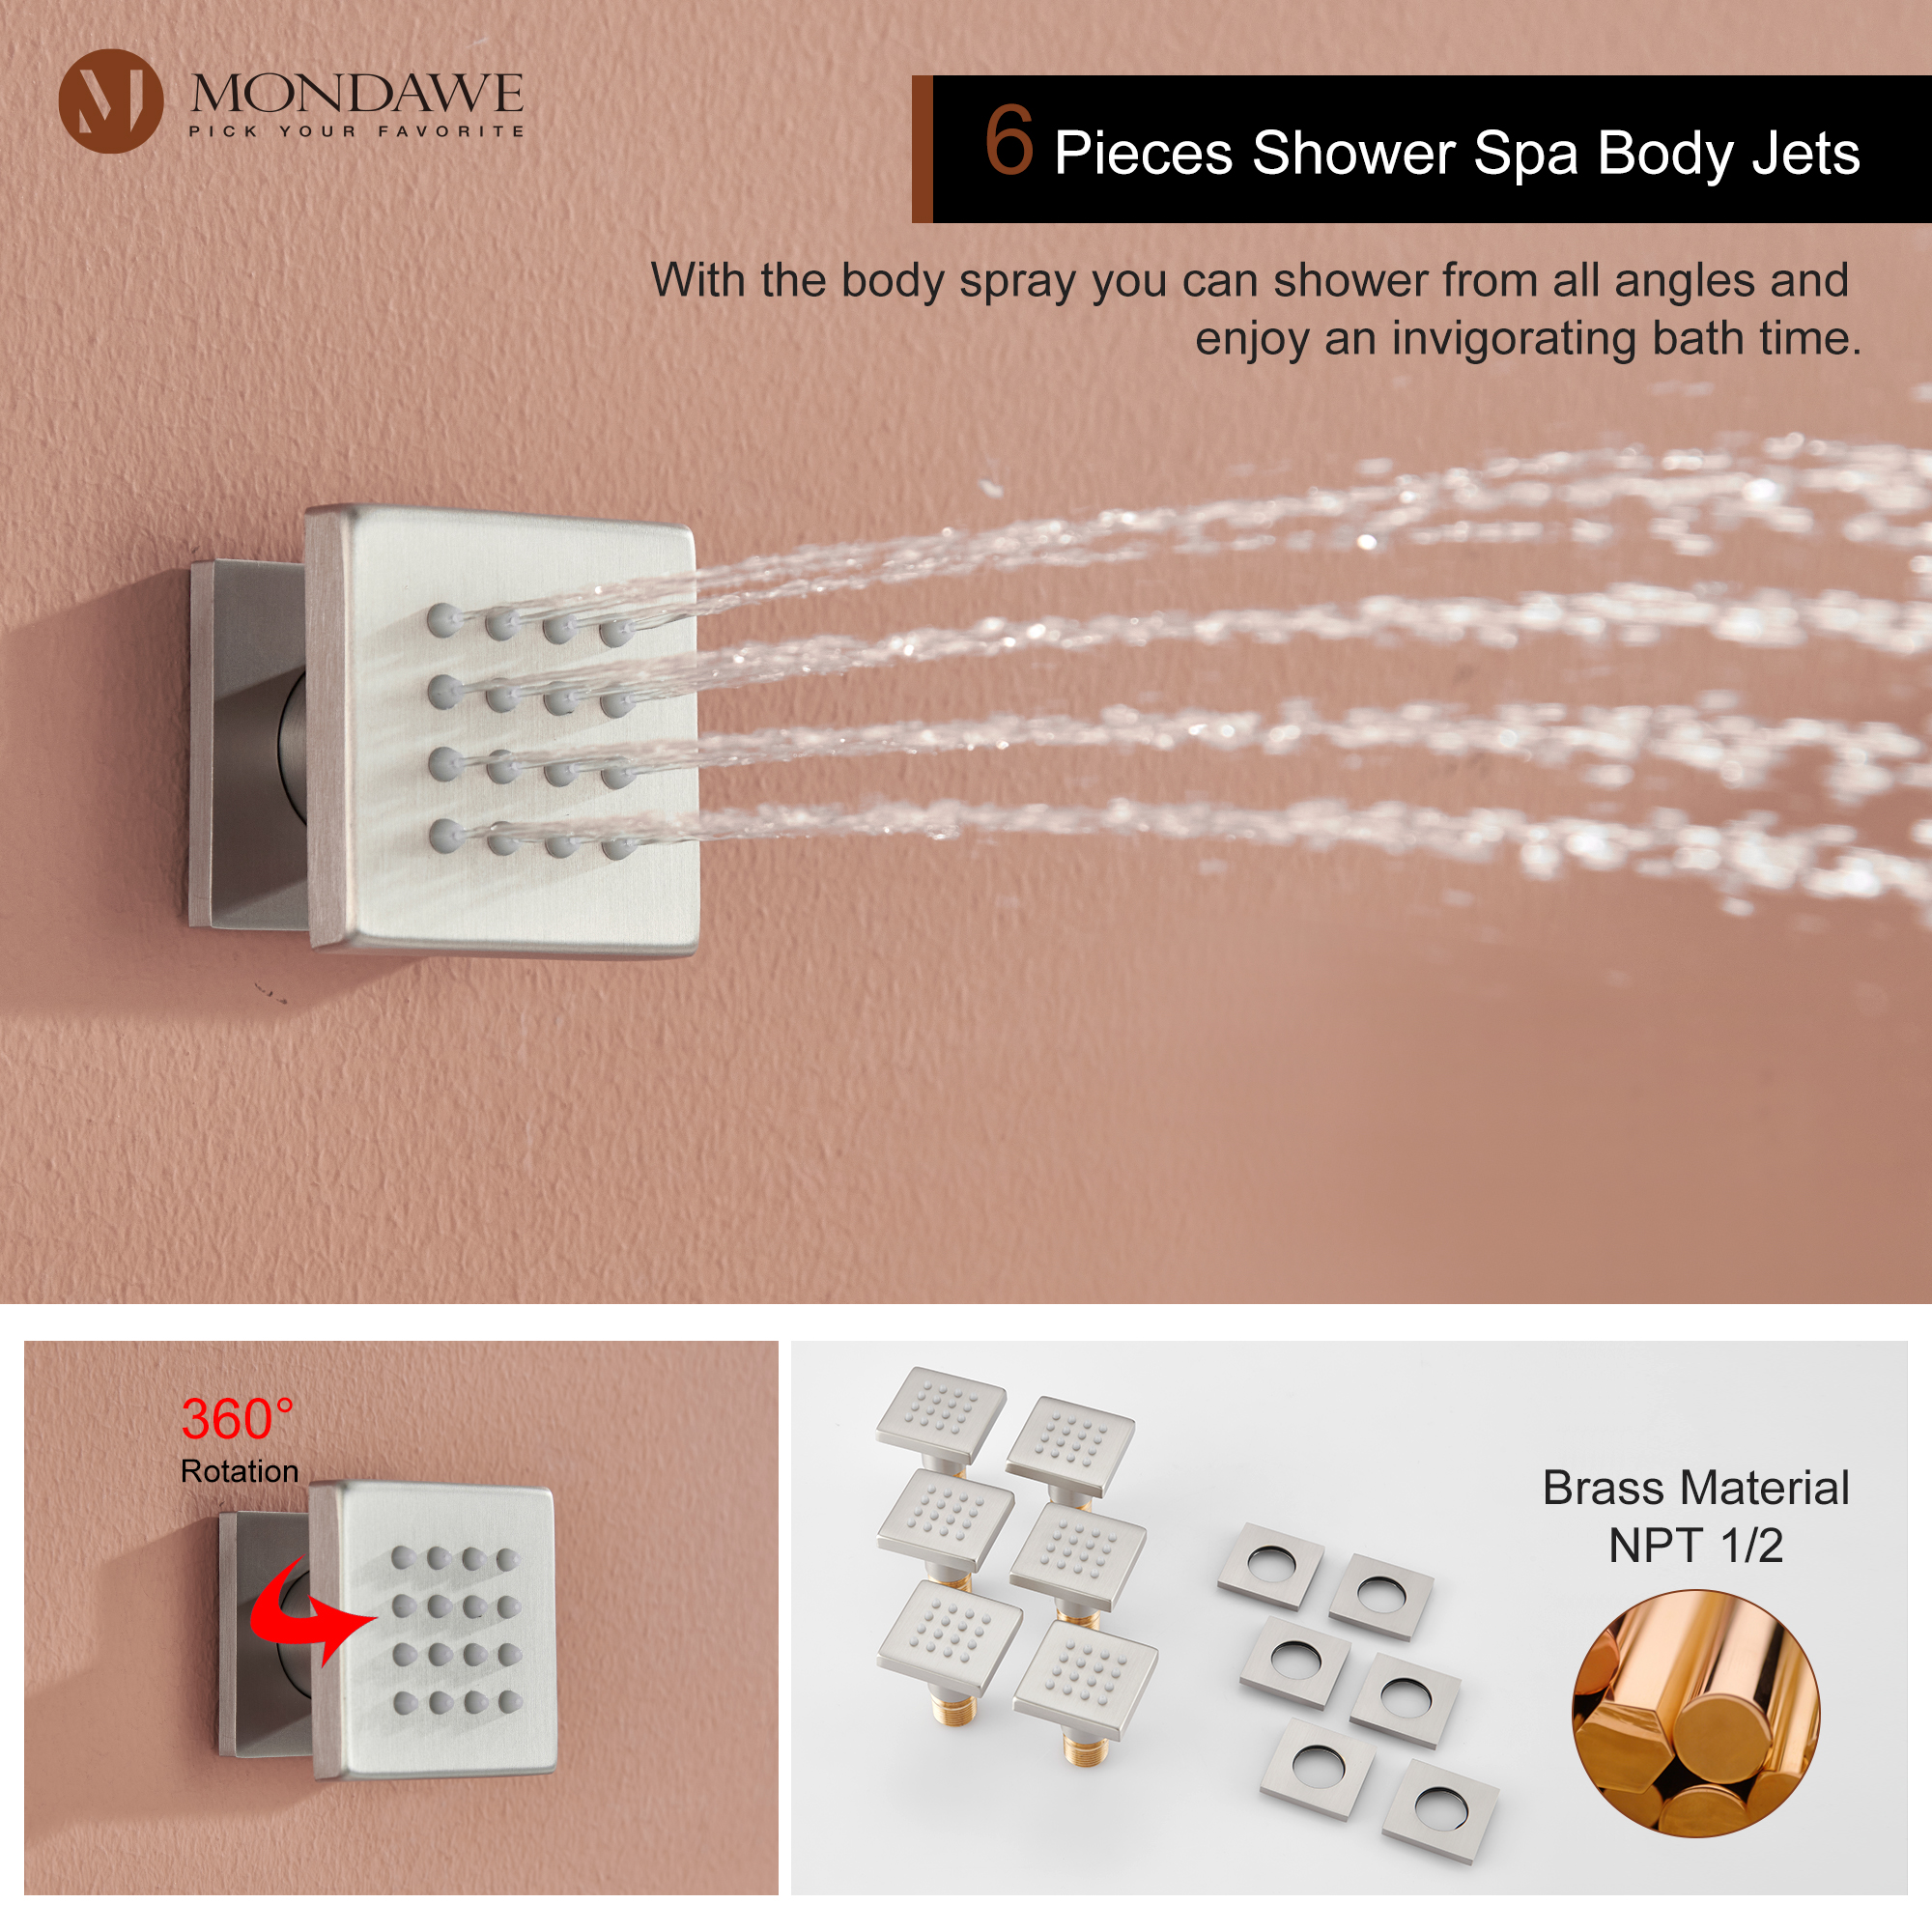 Rain shower system have 6 piece Wall Mounted Shower spurts, it drafted from brass.